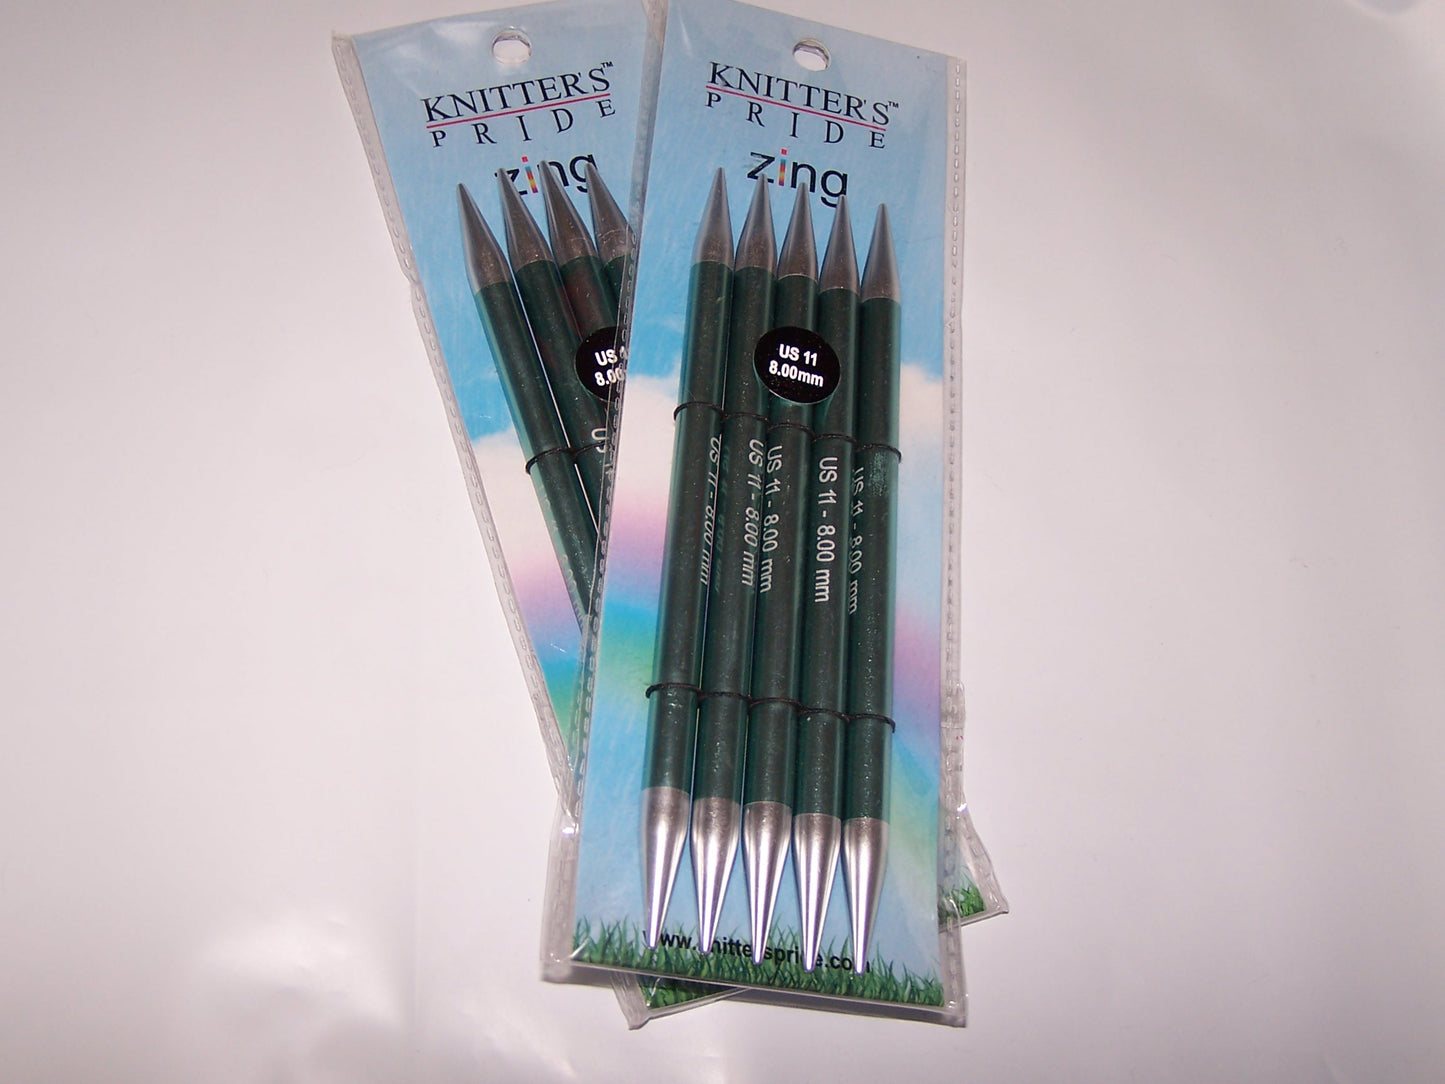 Knitters Pride Zing US 11 (8.00mm) size 6 inch DPN's